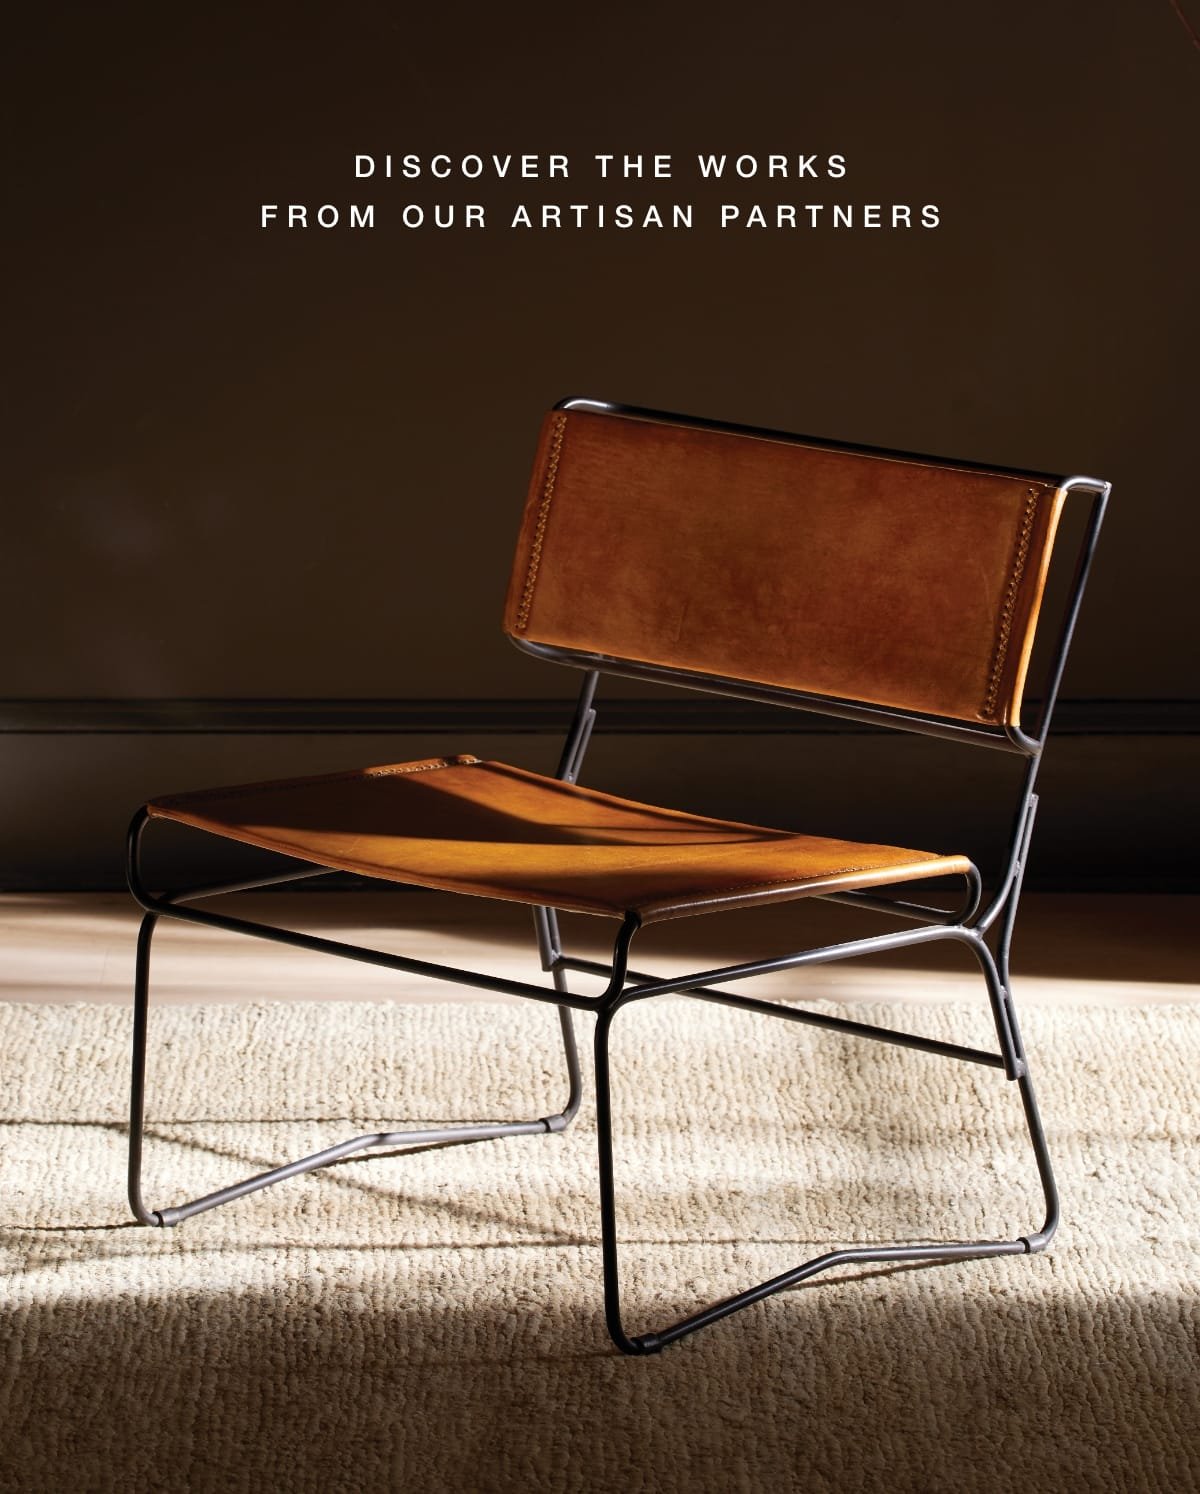 Discover the Oeste Chair and other Artisan-crafted pieces